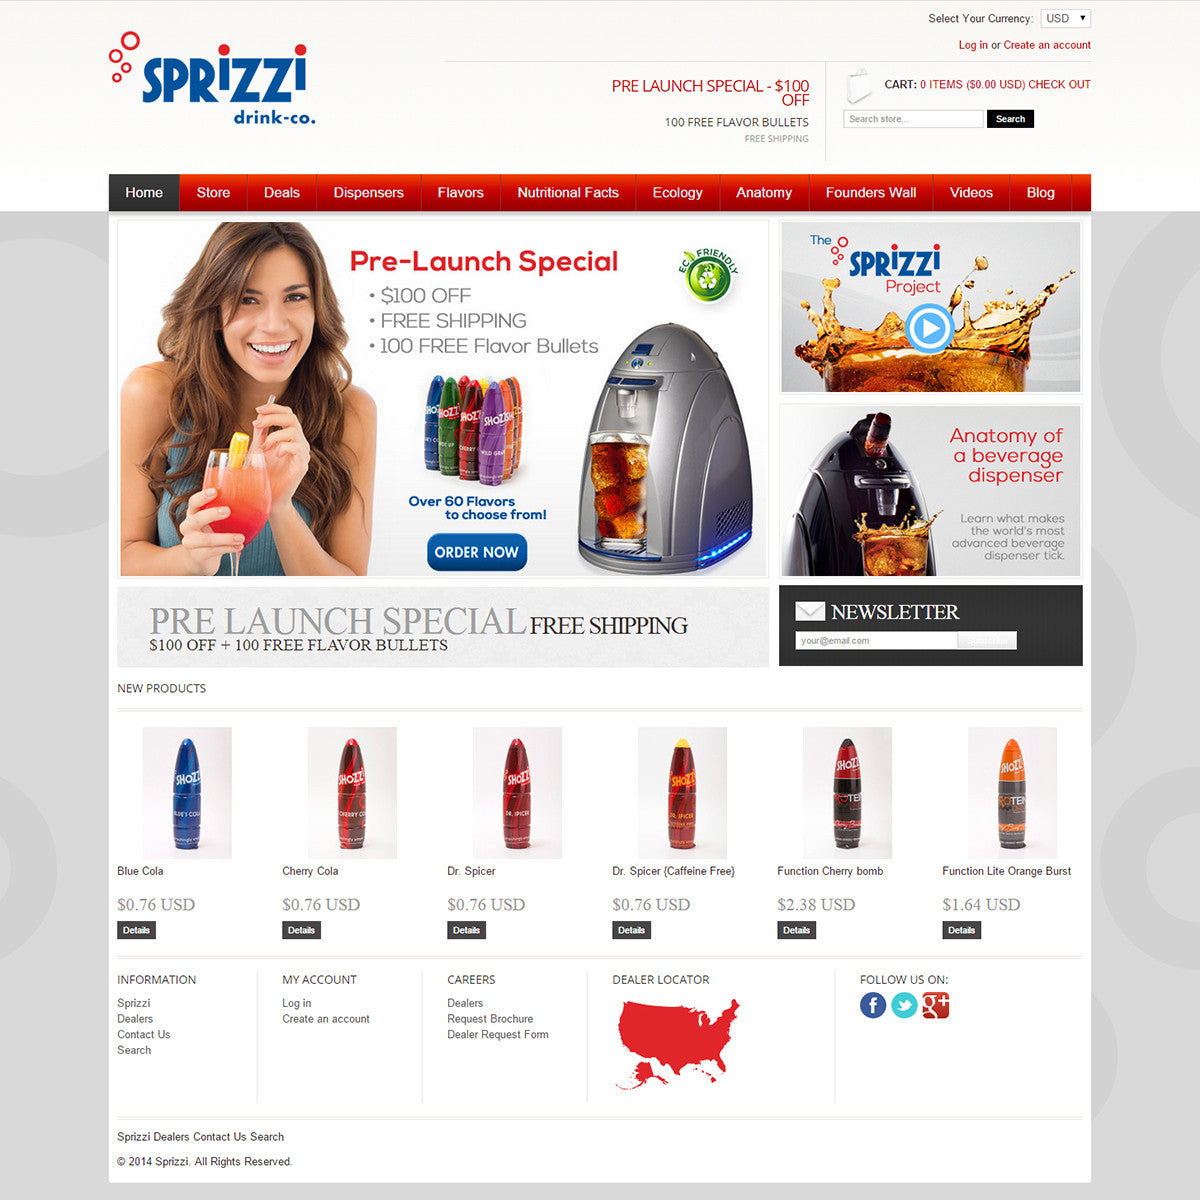 Sprizzi Drink Co. - Photography and Web Design - Los Angeles, US based Shopify Experts Revo Designs